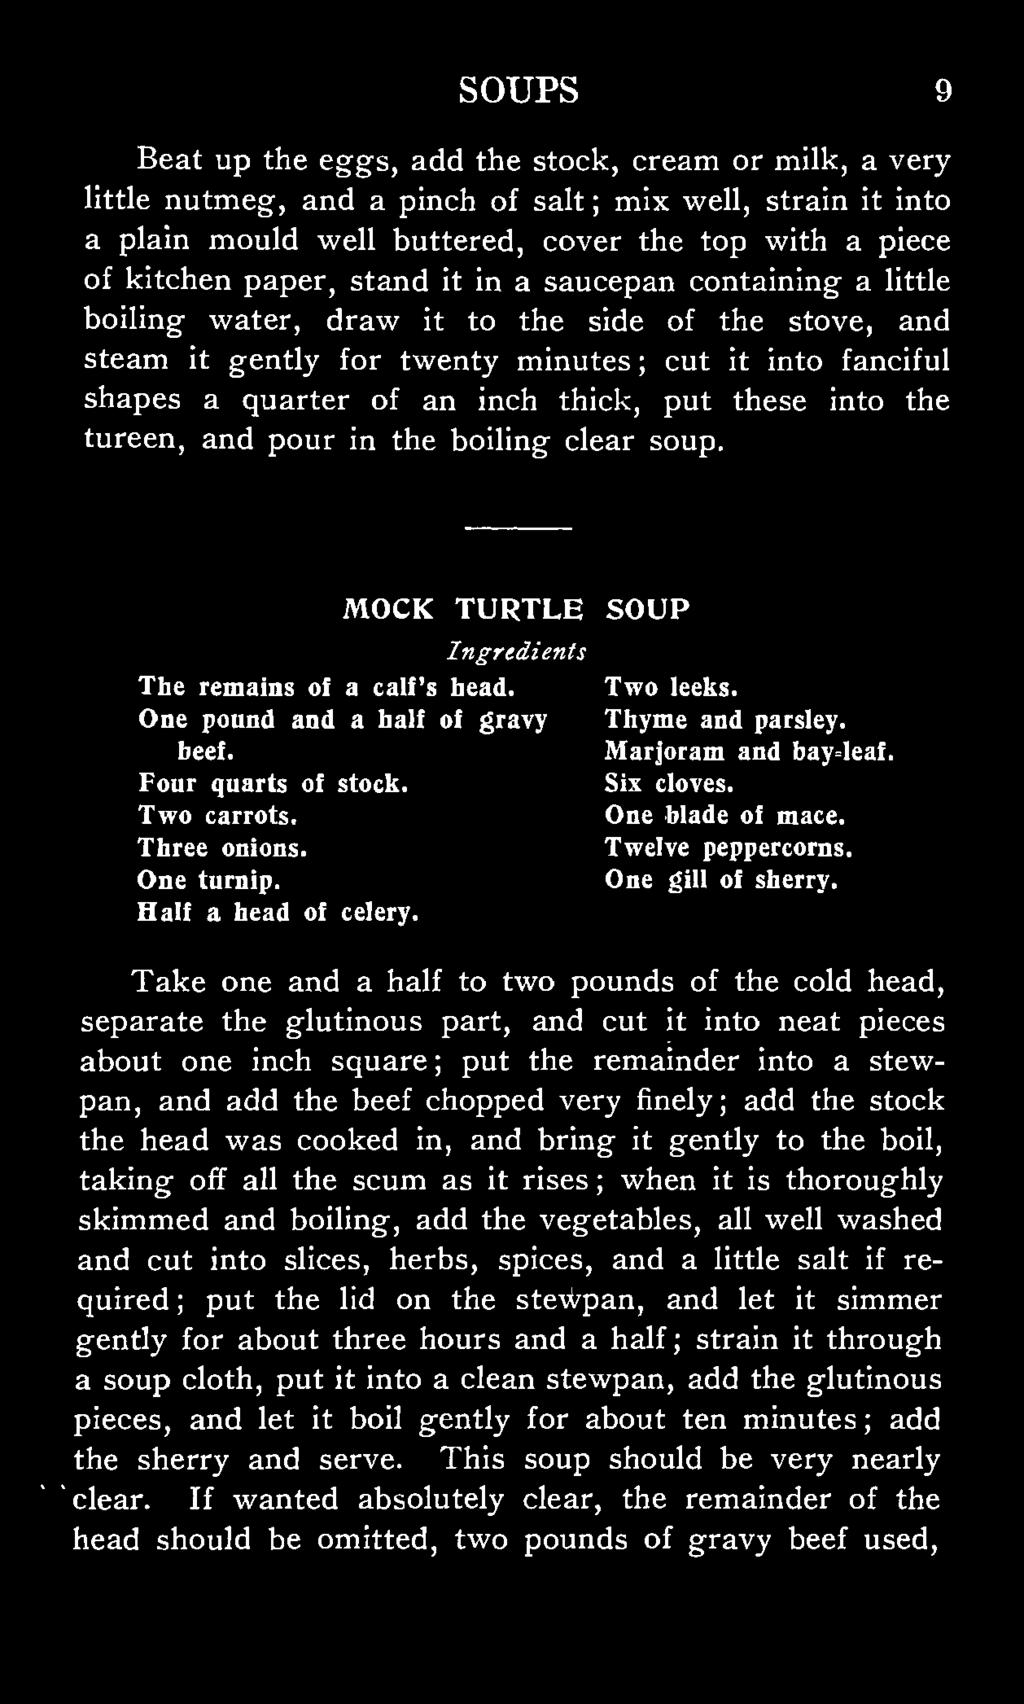 into the tureen, and pour in the boiling clear soup. MOCK TURTLE SOUP The remains of a calf's head. Two leeks. One pound and a hall of gravy Thyme and parsley. beef. Marjoram and bay leaf.